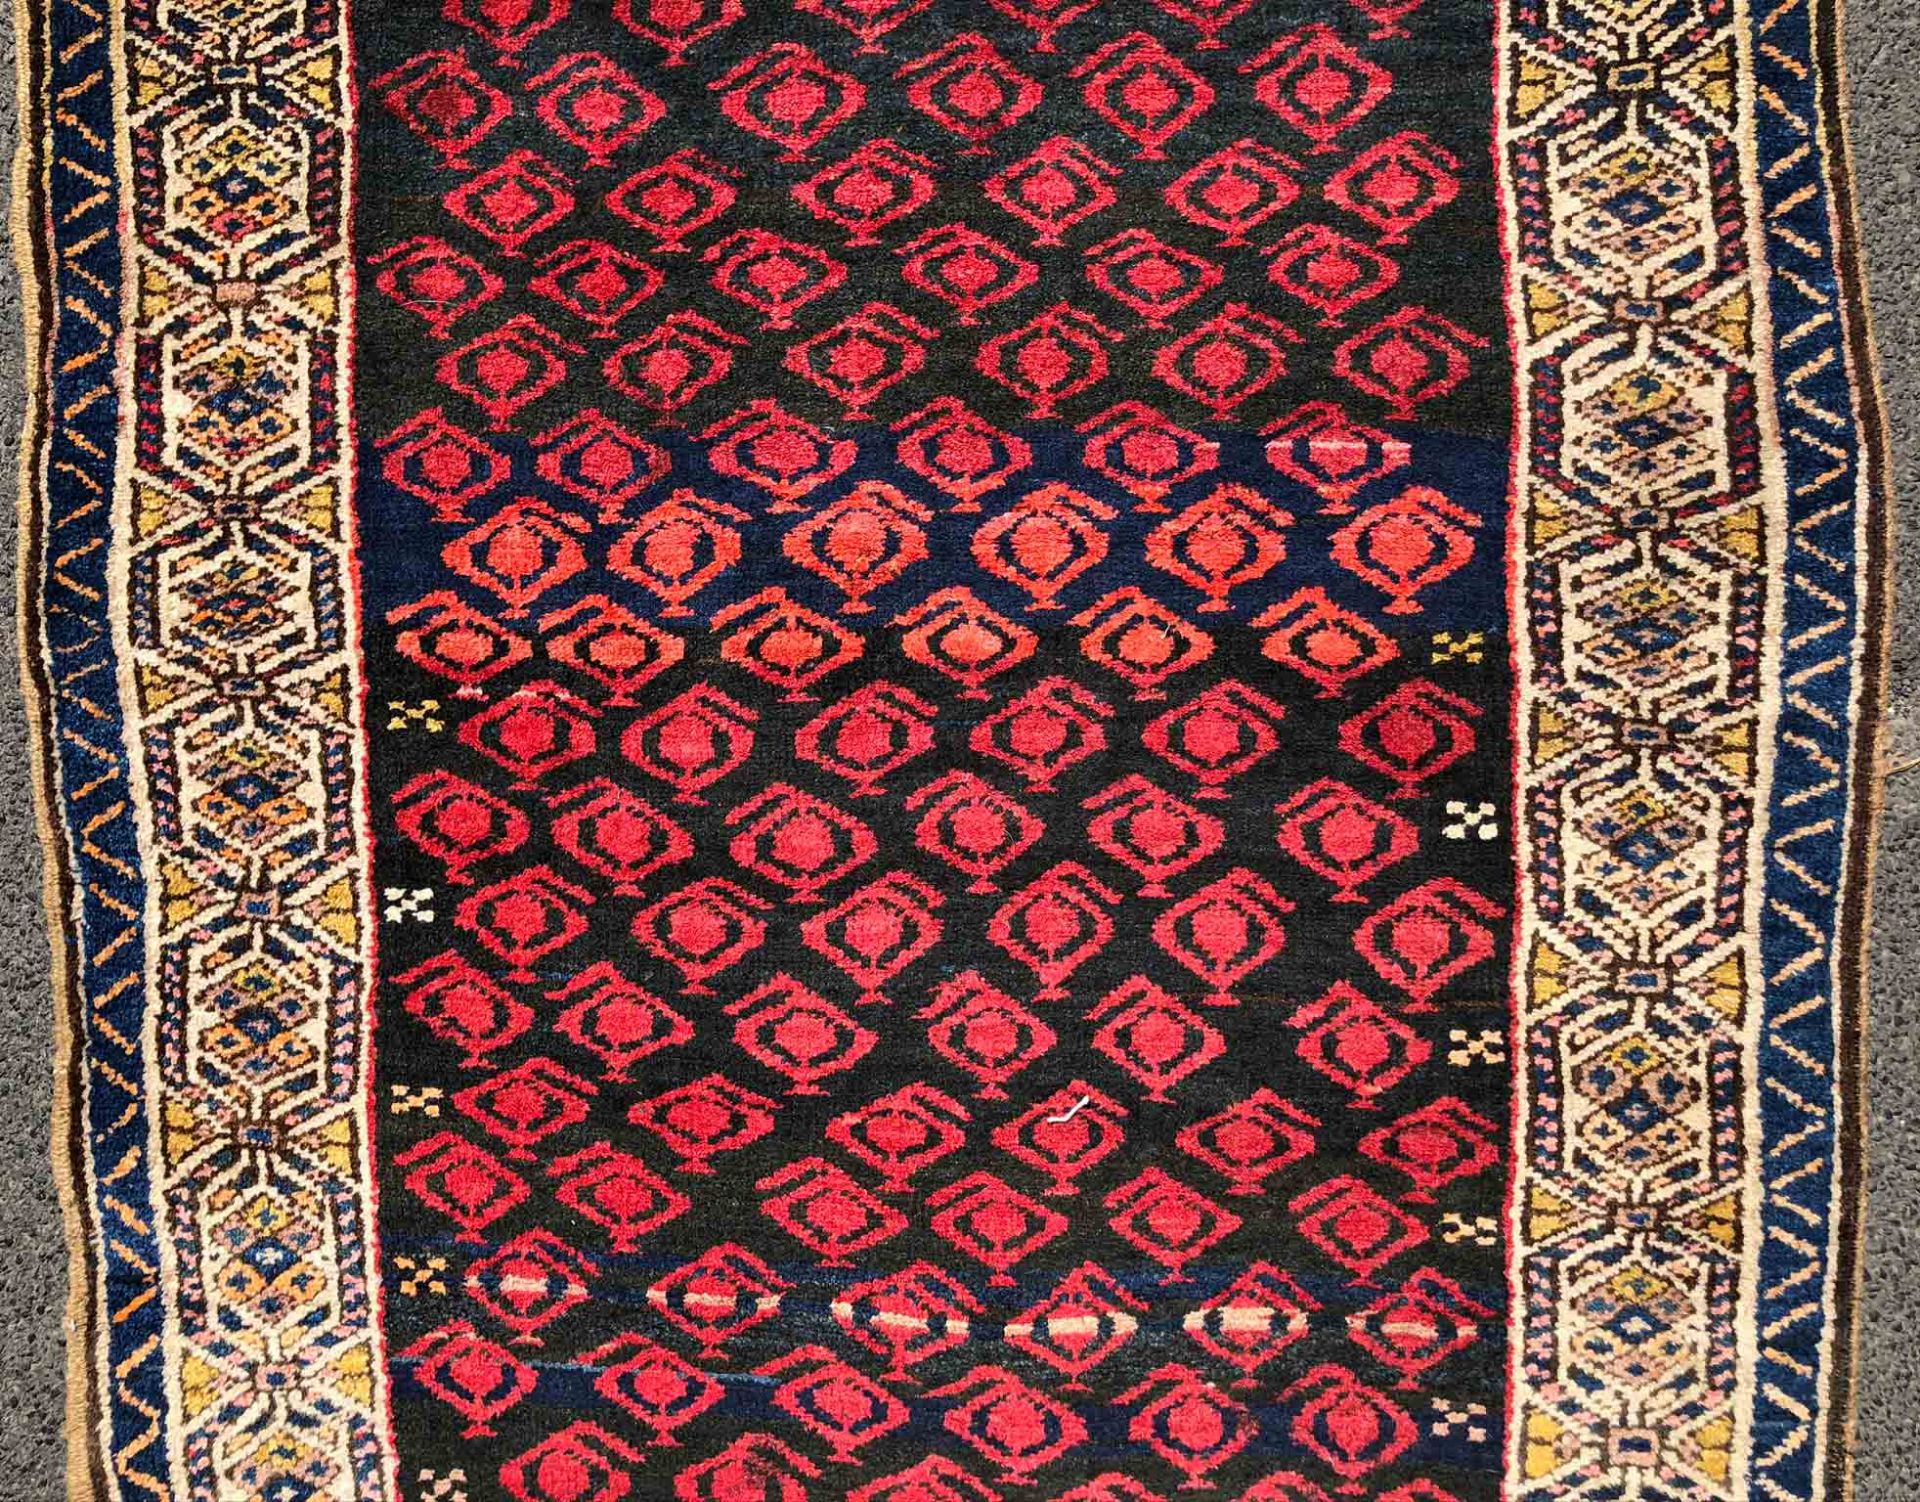 Hamadan Persian carpet. Iran. Antique, around 1910.352 cm x 108 cm. Knotted by hand. Wool on cotton. - Image 4 of 8